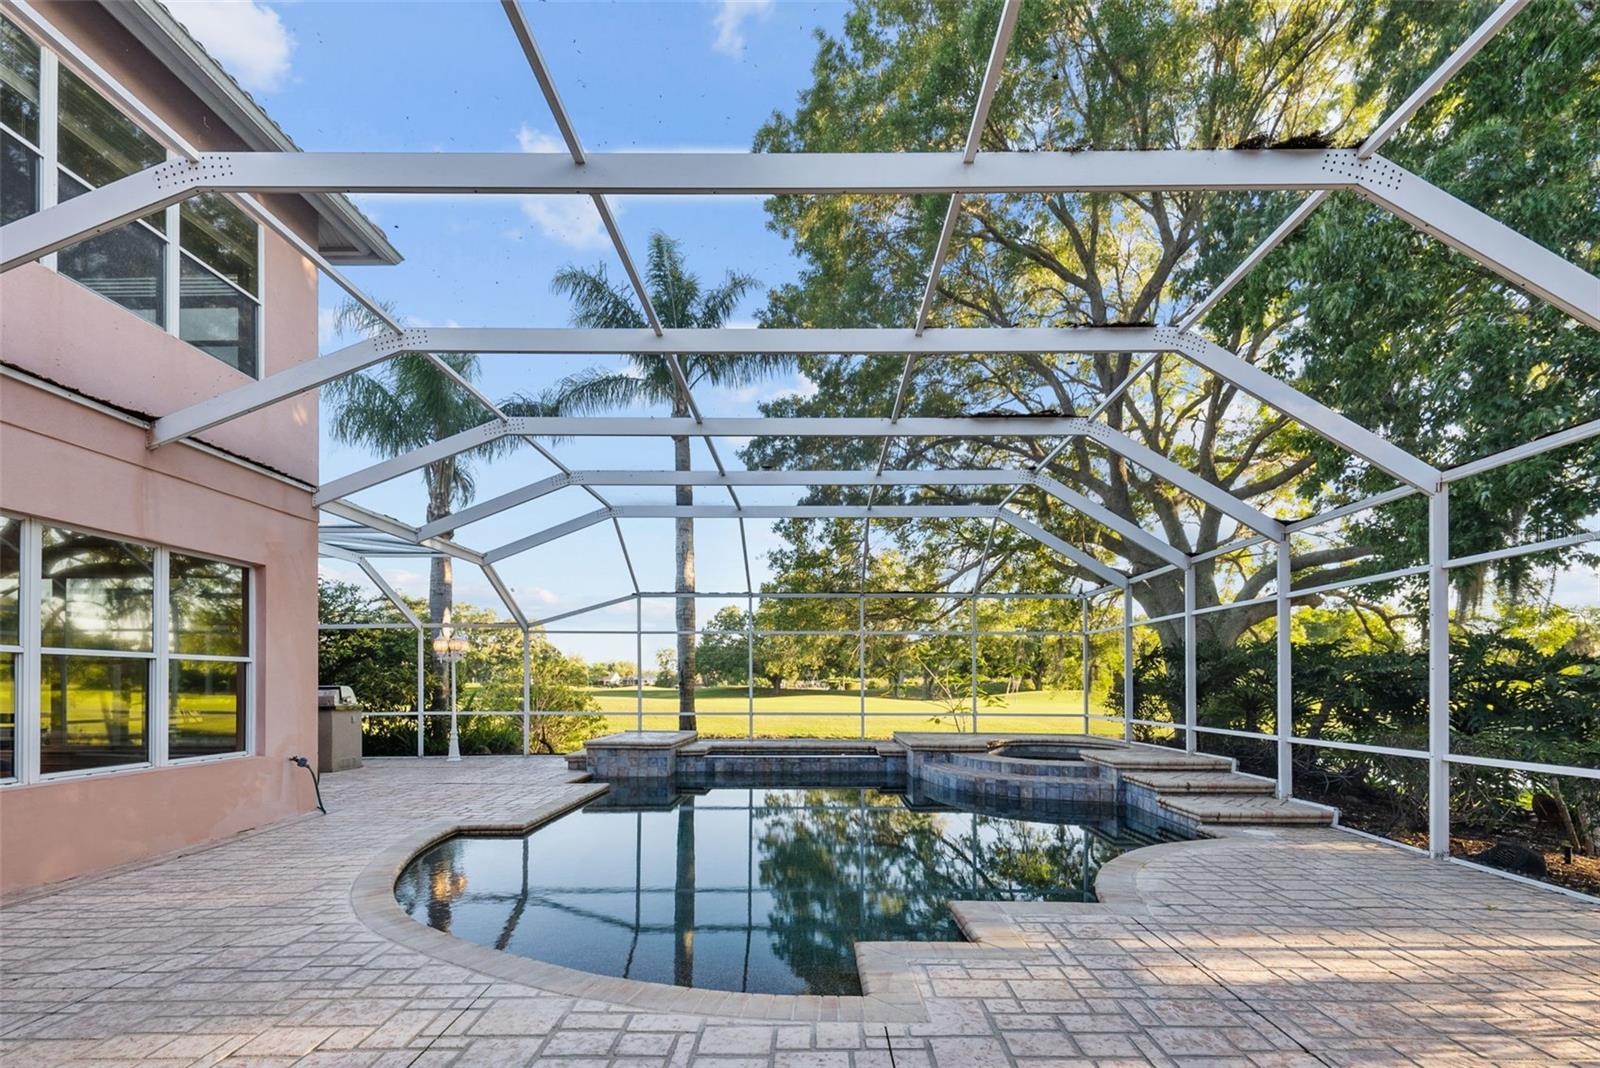 Large patio area - watch TV or listen to music and take a dip in the pool!